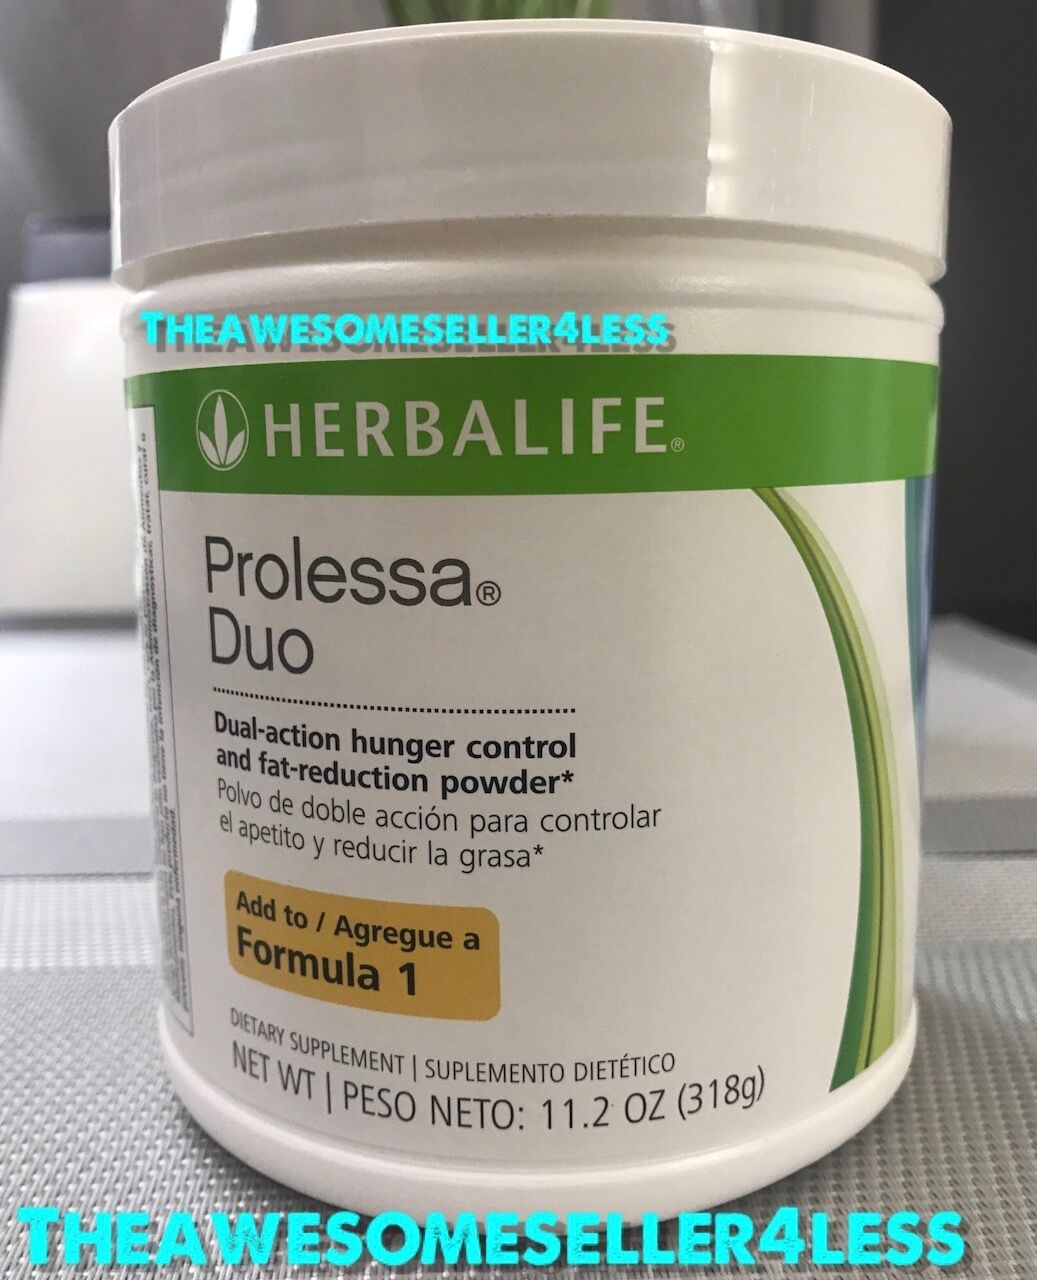 NEW Herbalife PROLESSA DUO 11.2 oz Weight Management Powder - 30 Day Supply - Men Guide Store